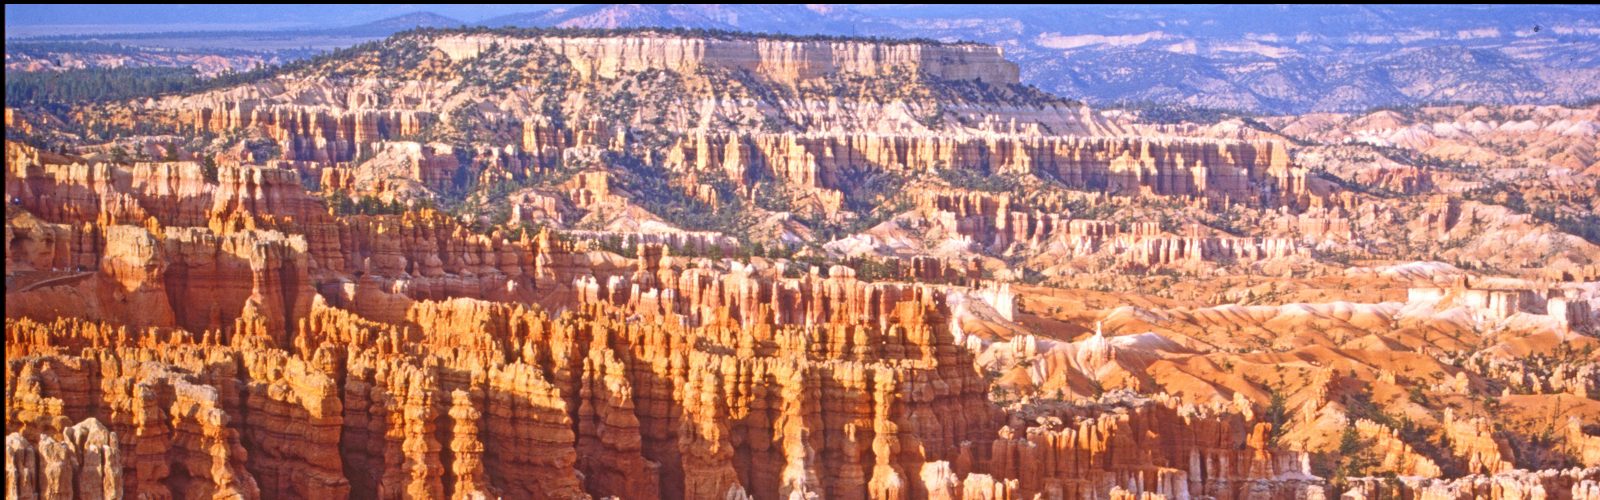  Bryce Canyon by Camille Johnson (Visit Southern Utah) 